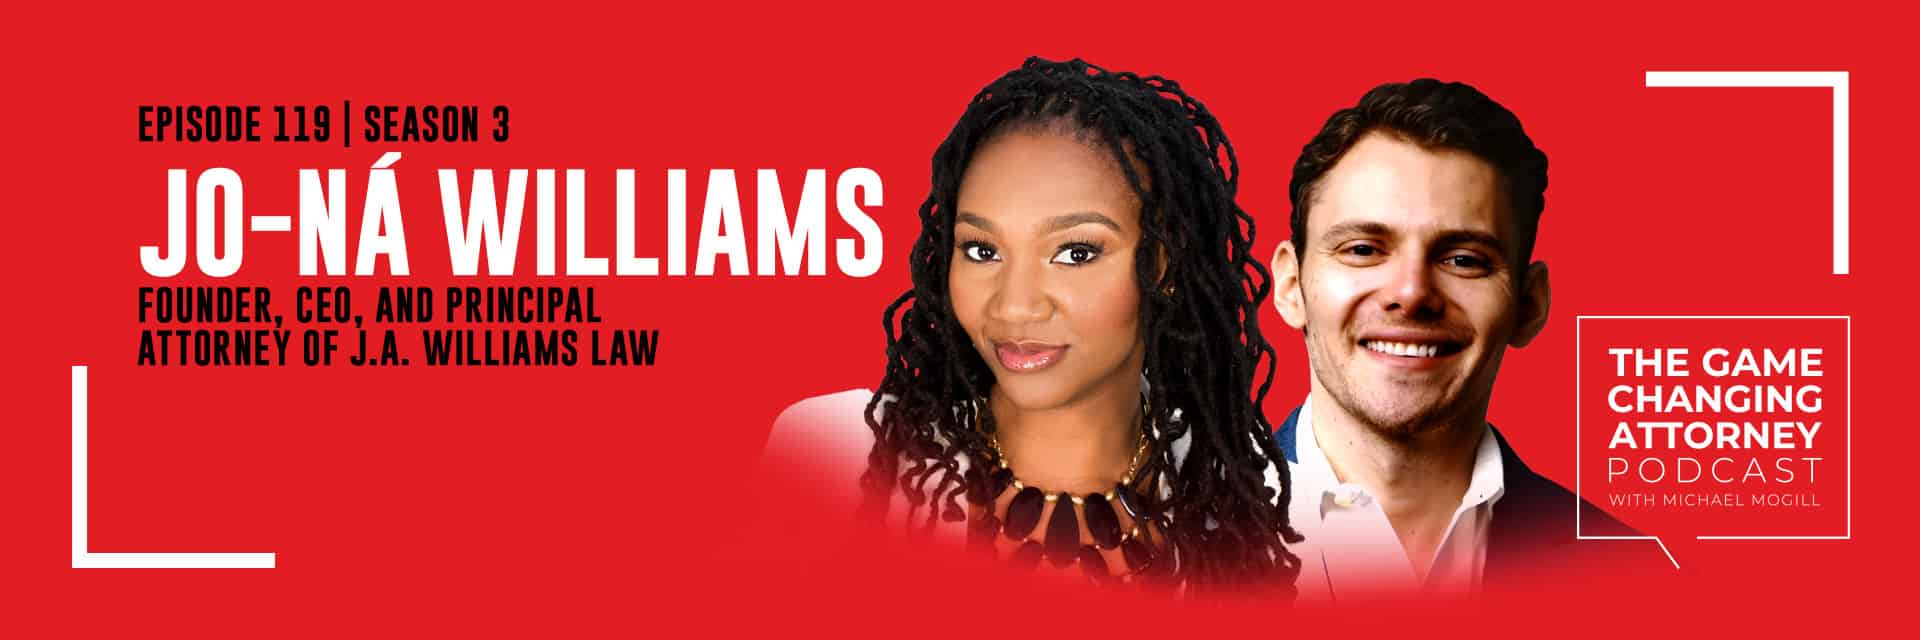 The Game Changing Attorney Podcast: Jo-Ná Williams